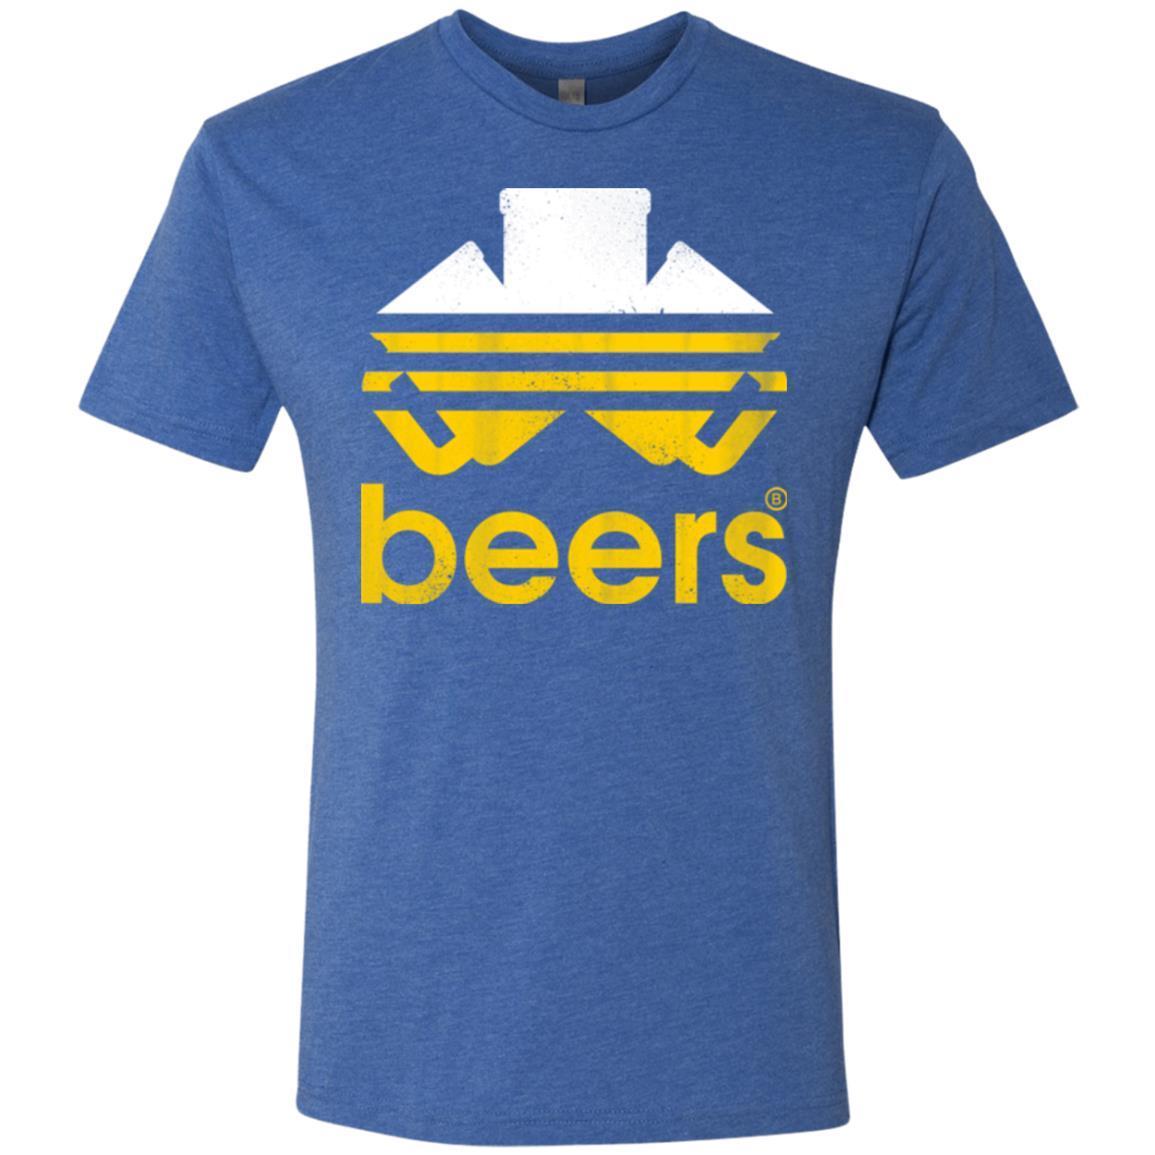 T-Shirts Vintage Royal / Small Beers Men's Triblend T-Shirt